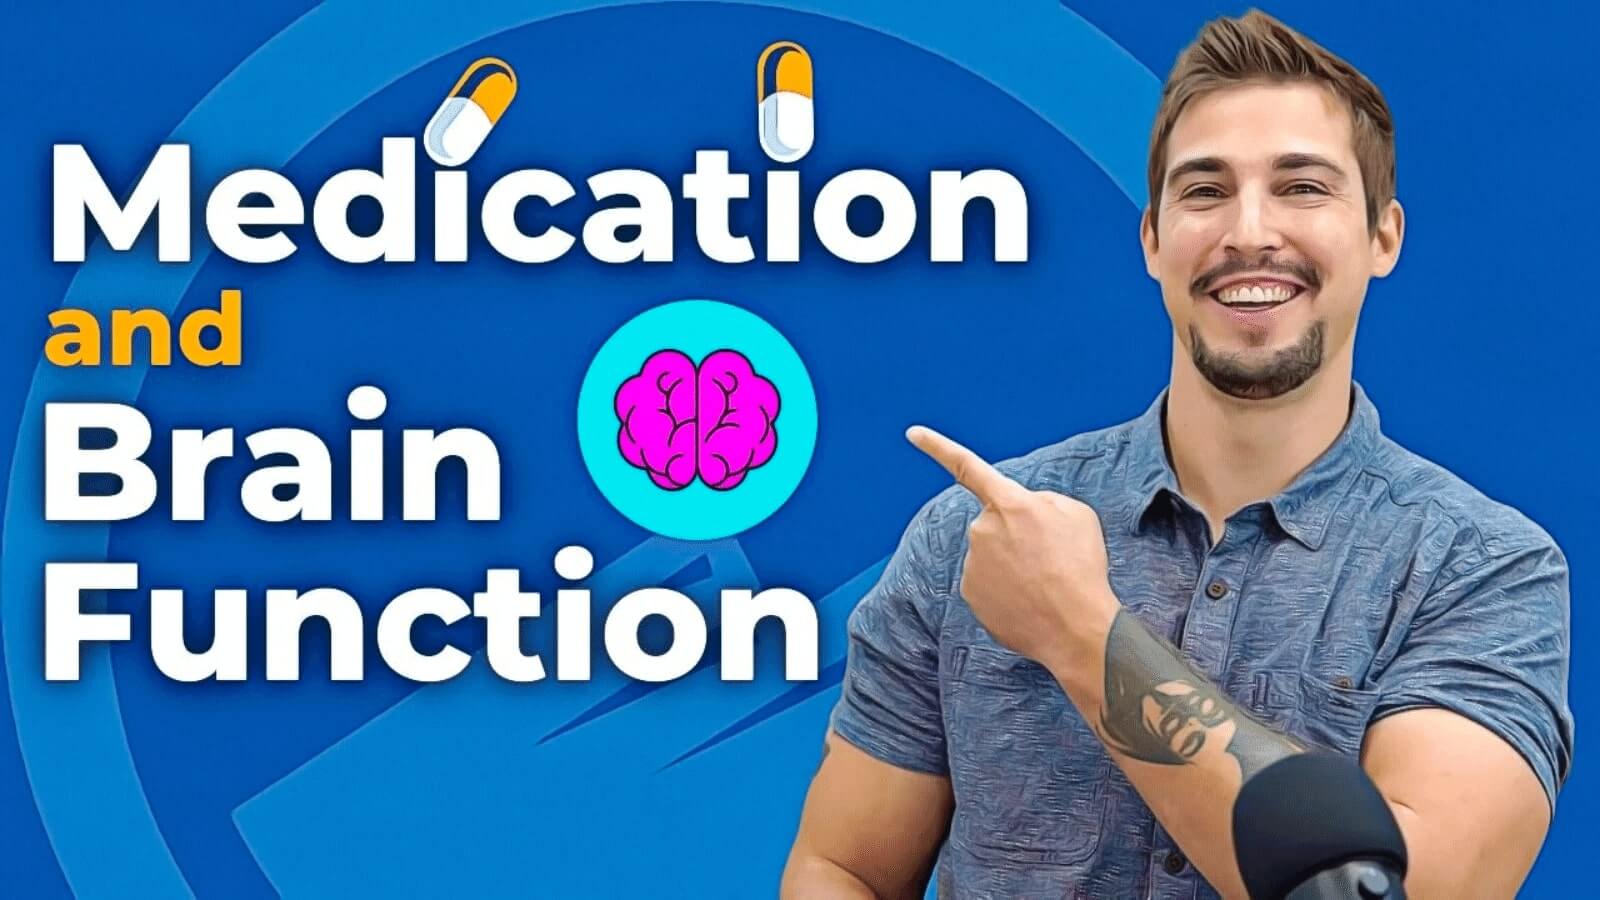 Medication and Brain Function